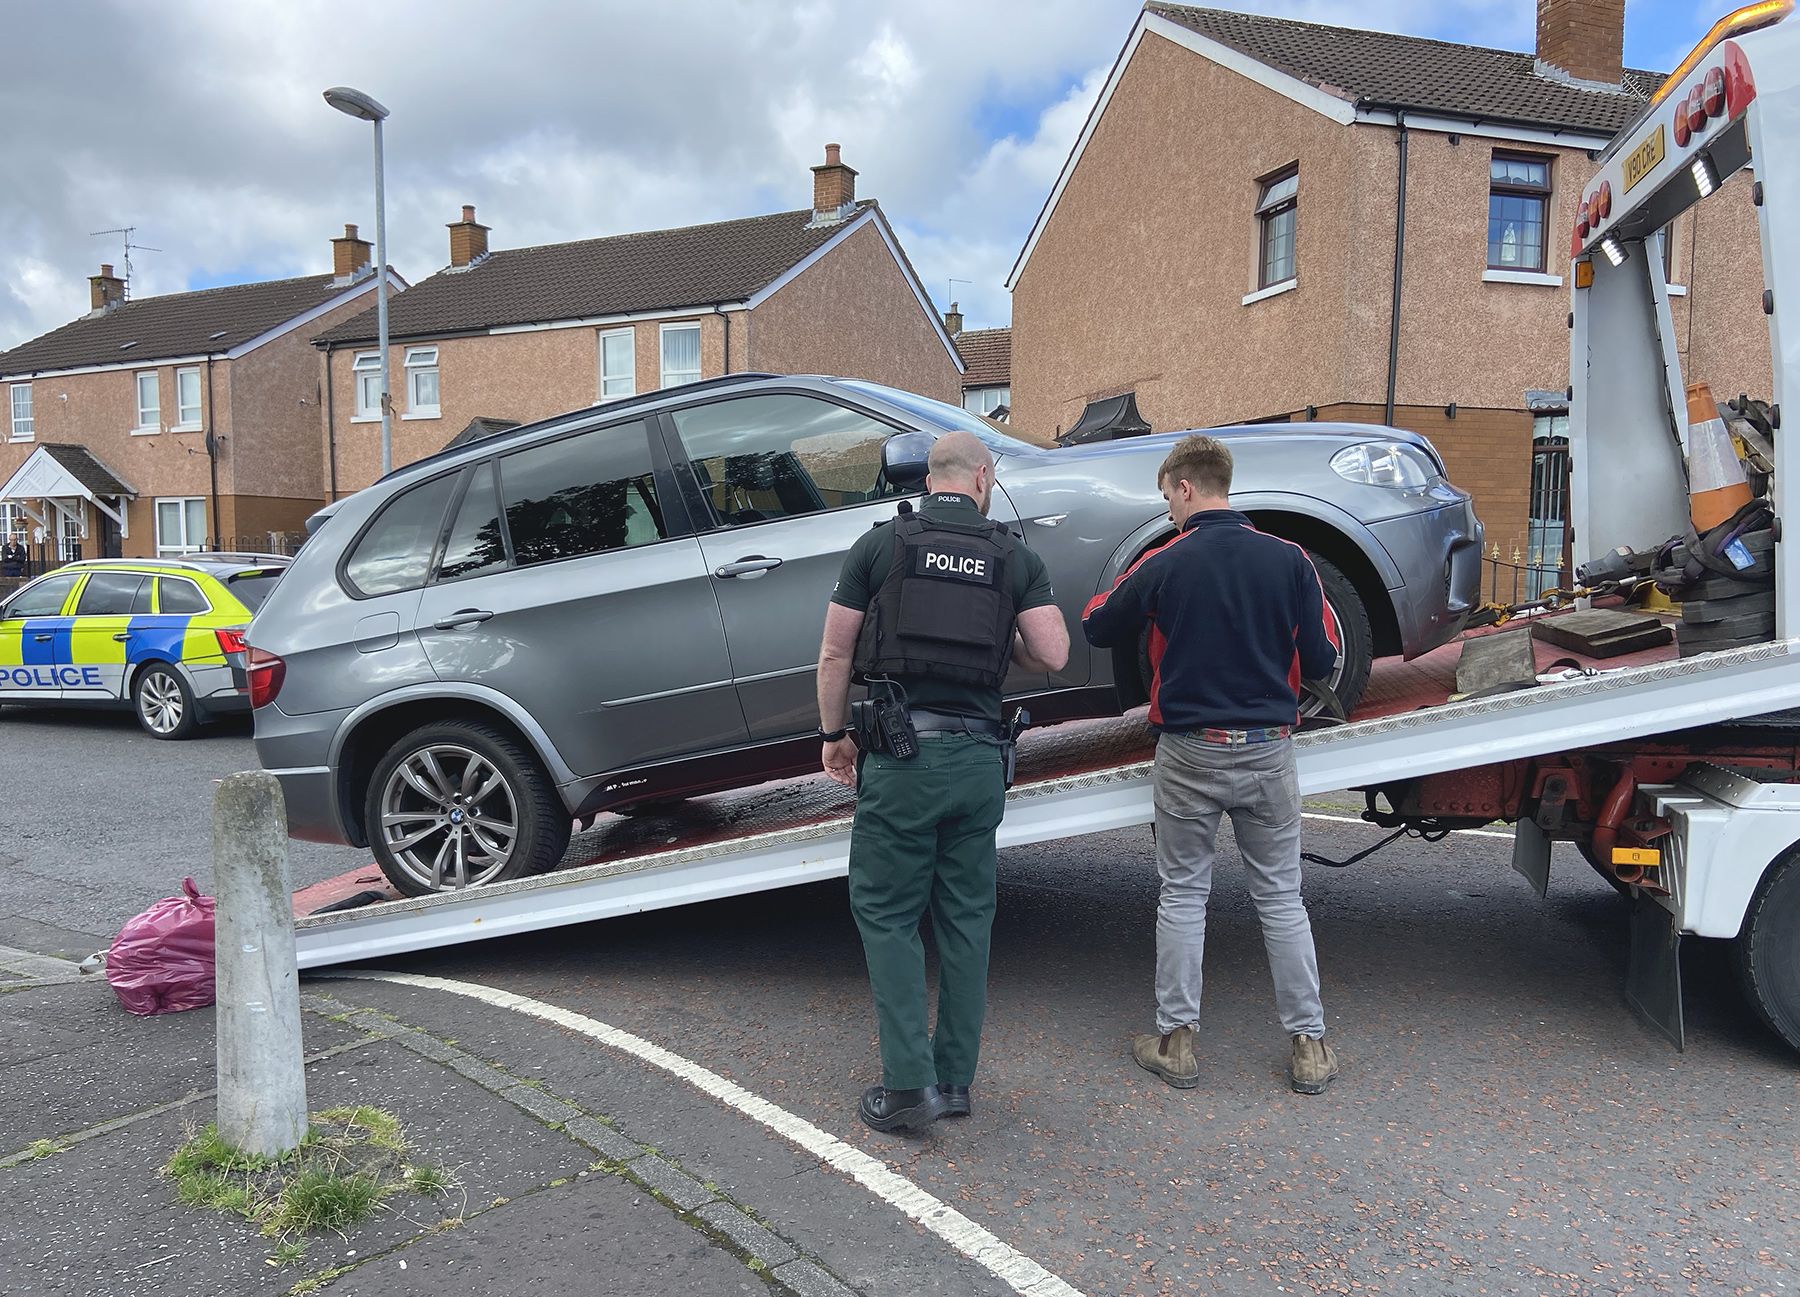 SEIZED: Police seized the suspected stolen vehicle in Ballymurphy after a pursuit through West Belfast